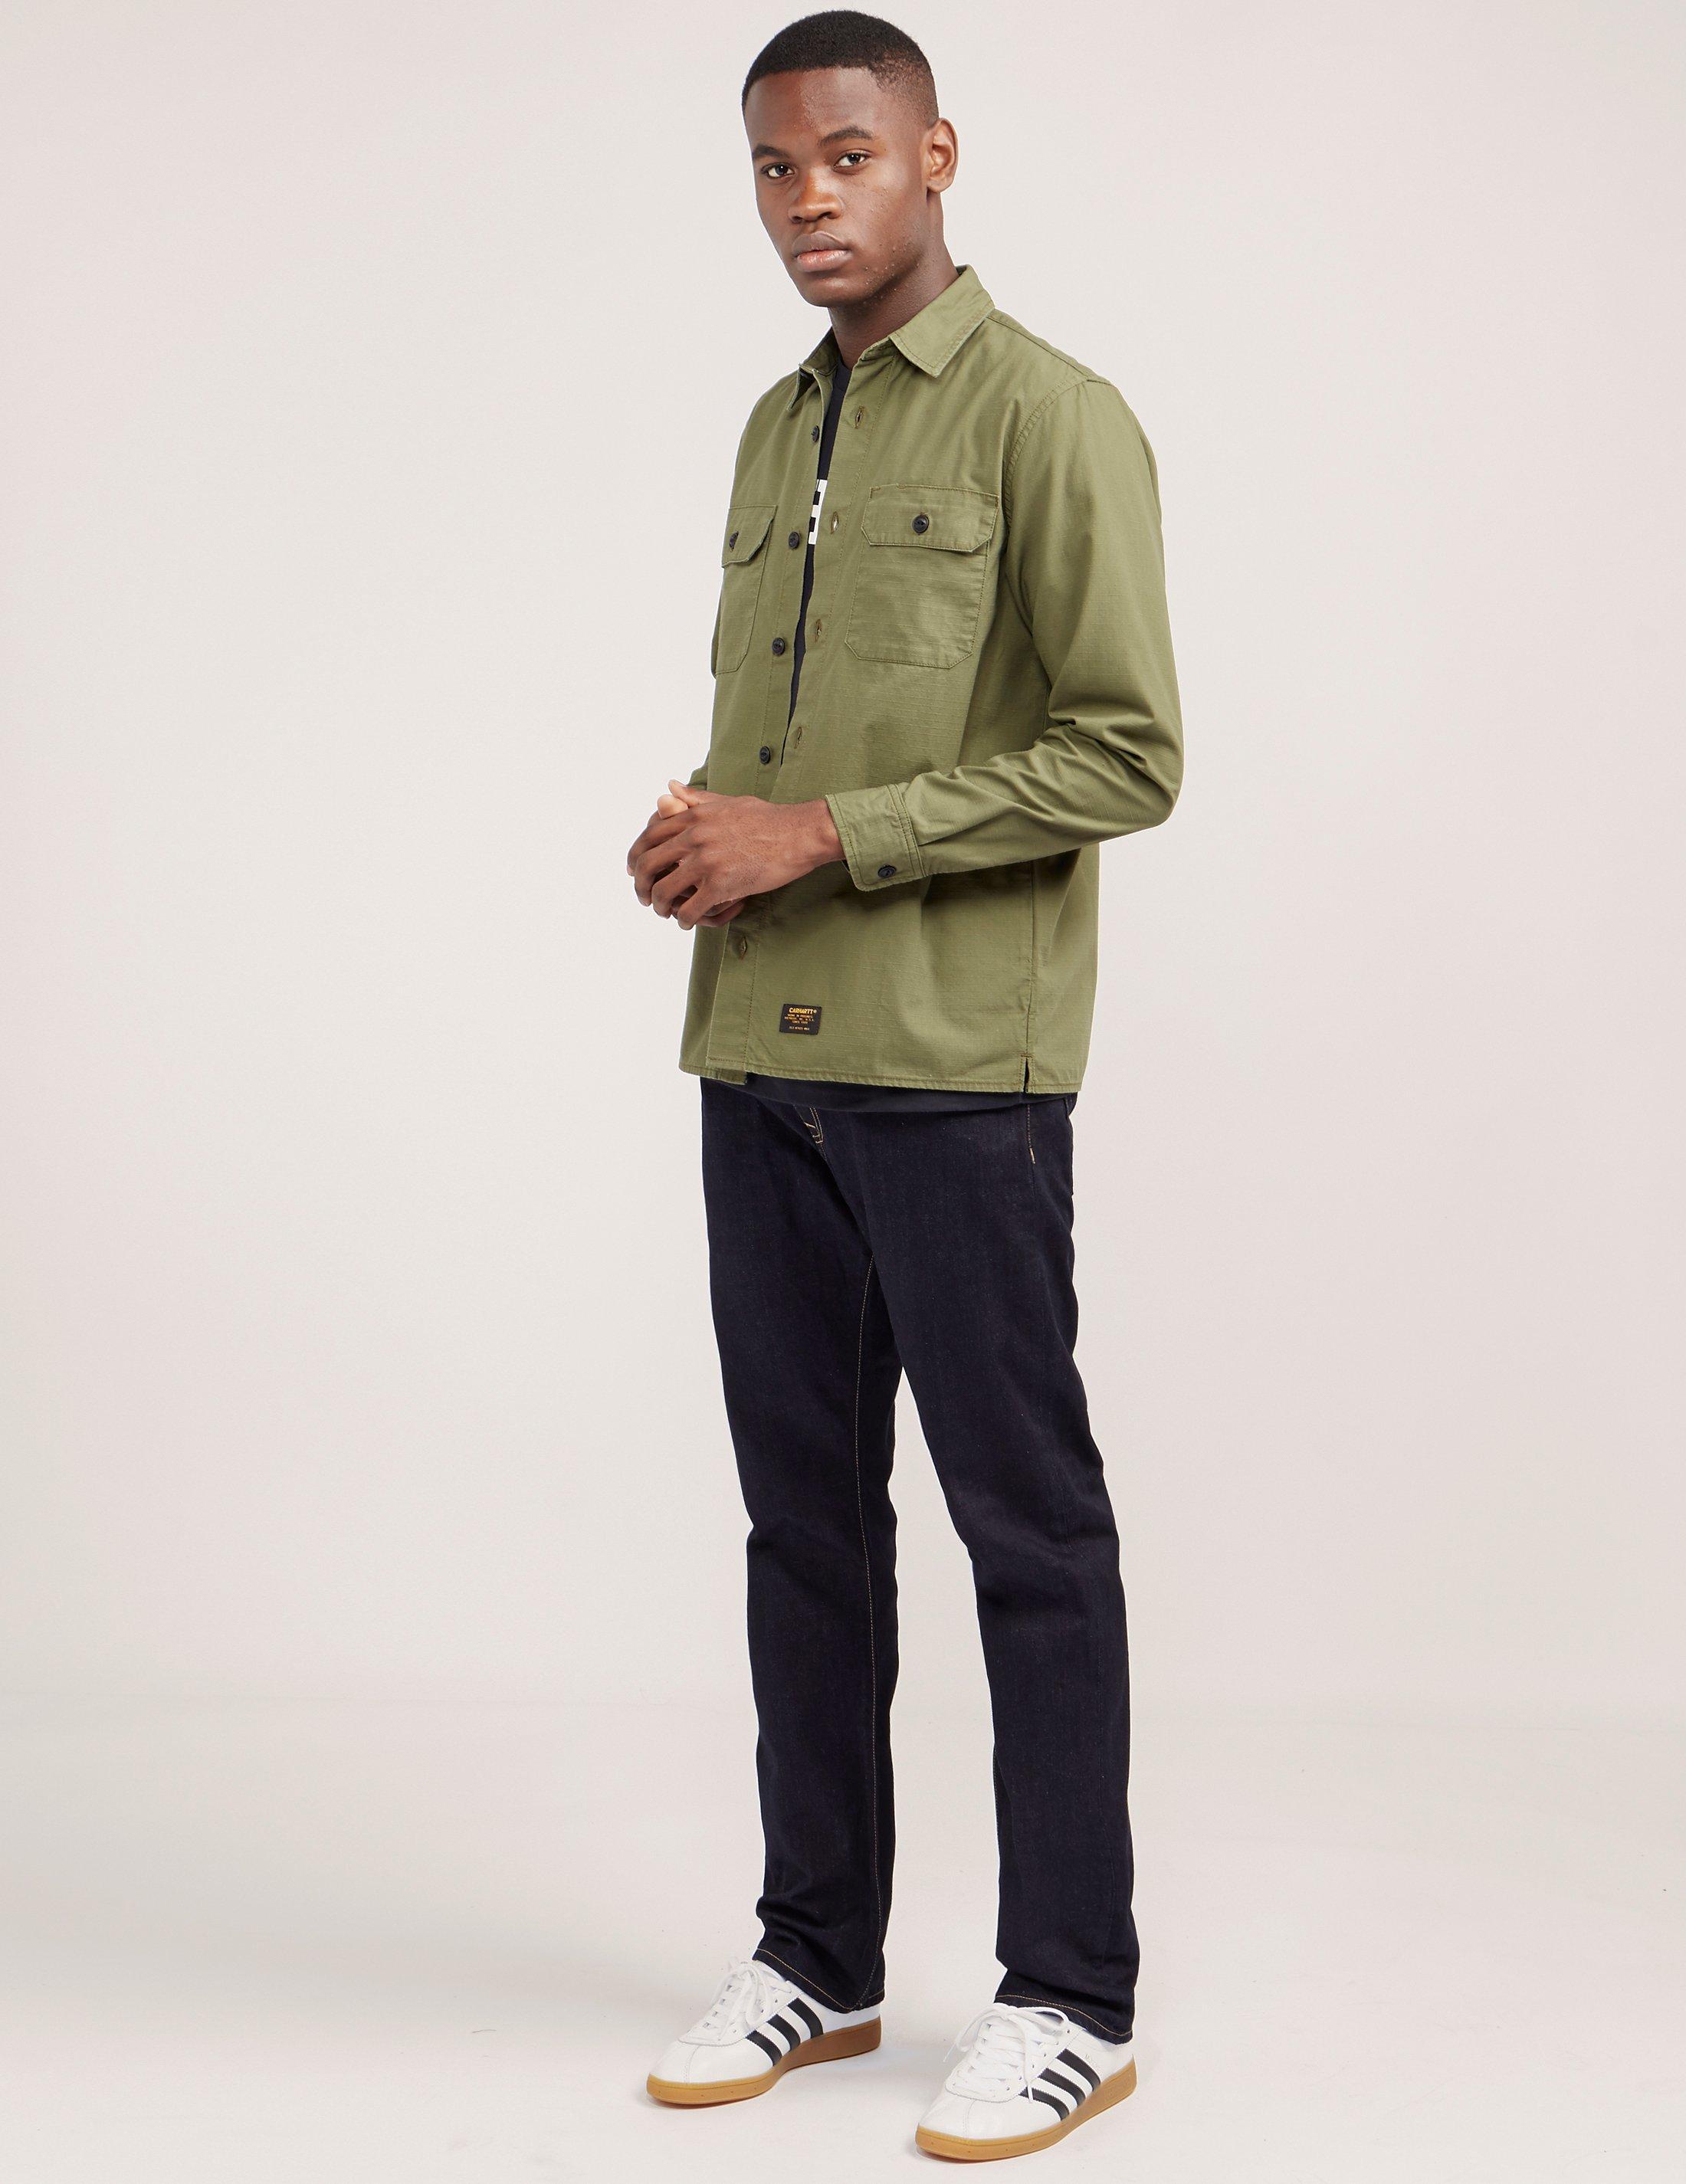 Carhartt WIP Cotton Mission Overshirt in Olive (Green) for Men - Lyst